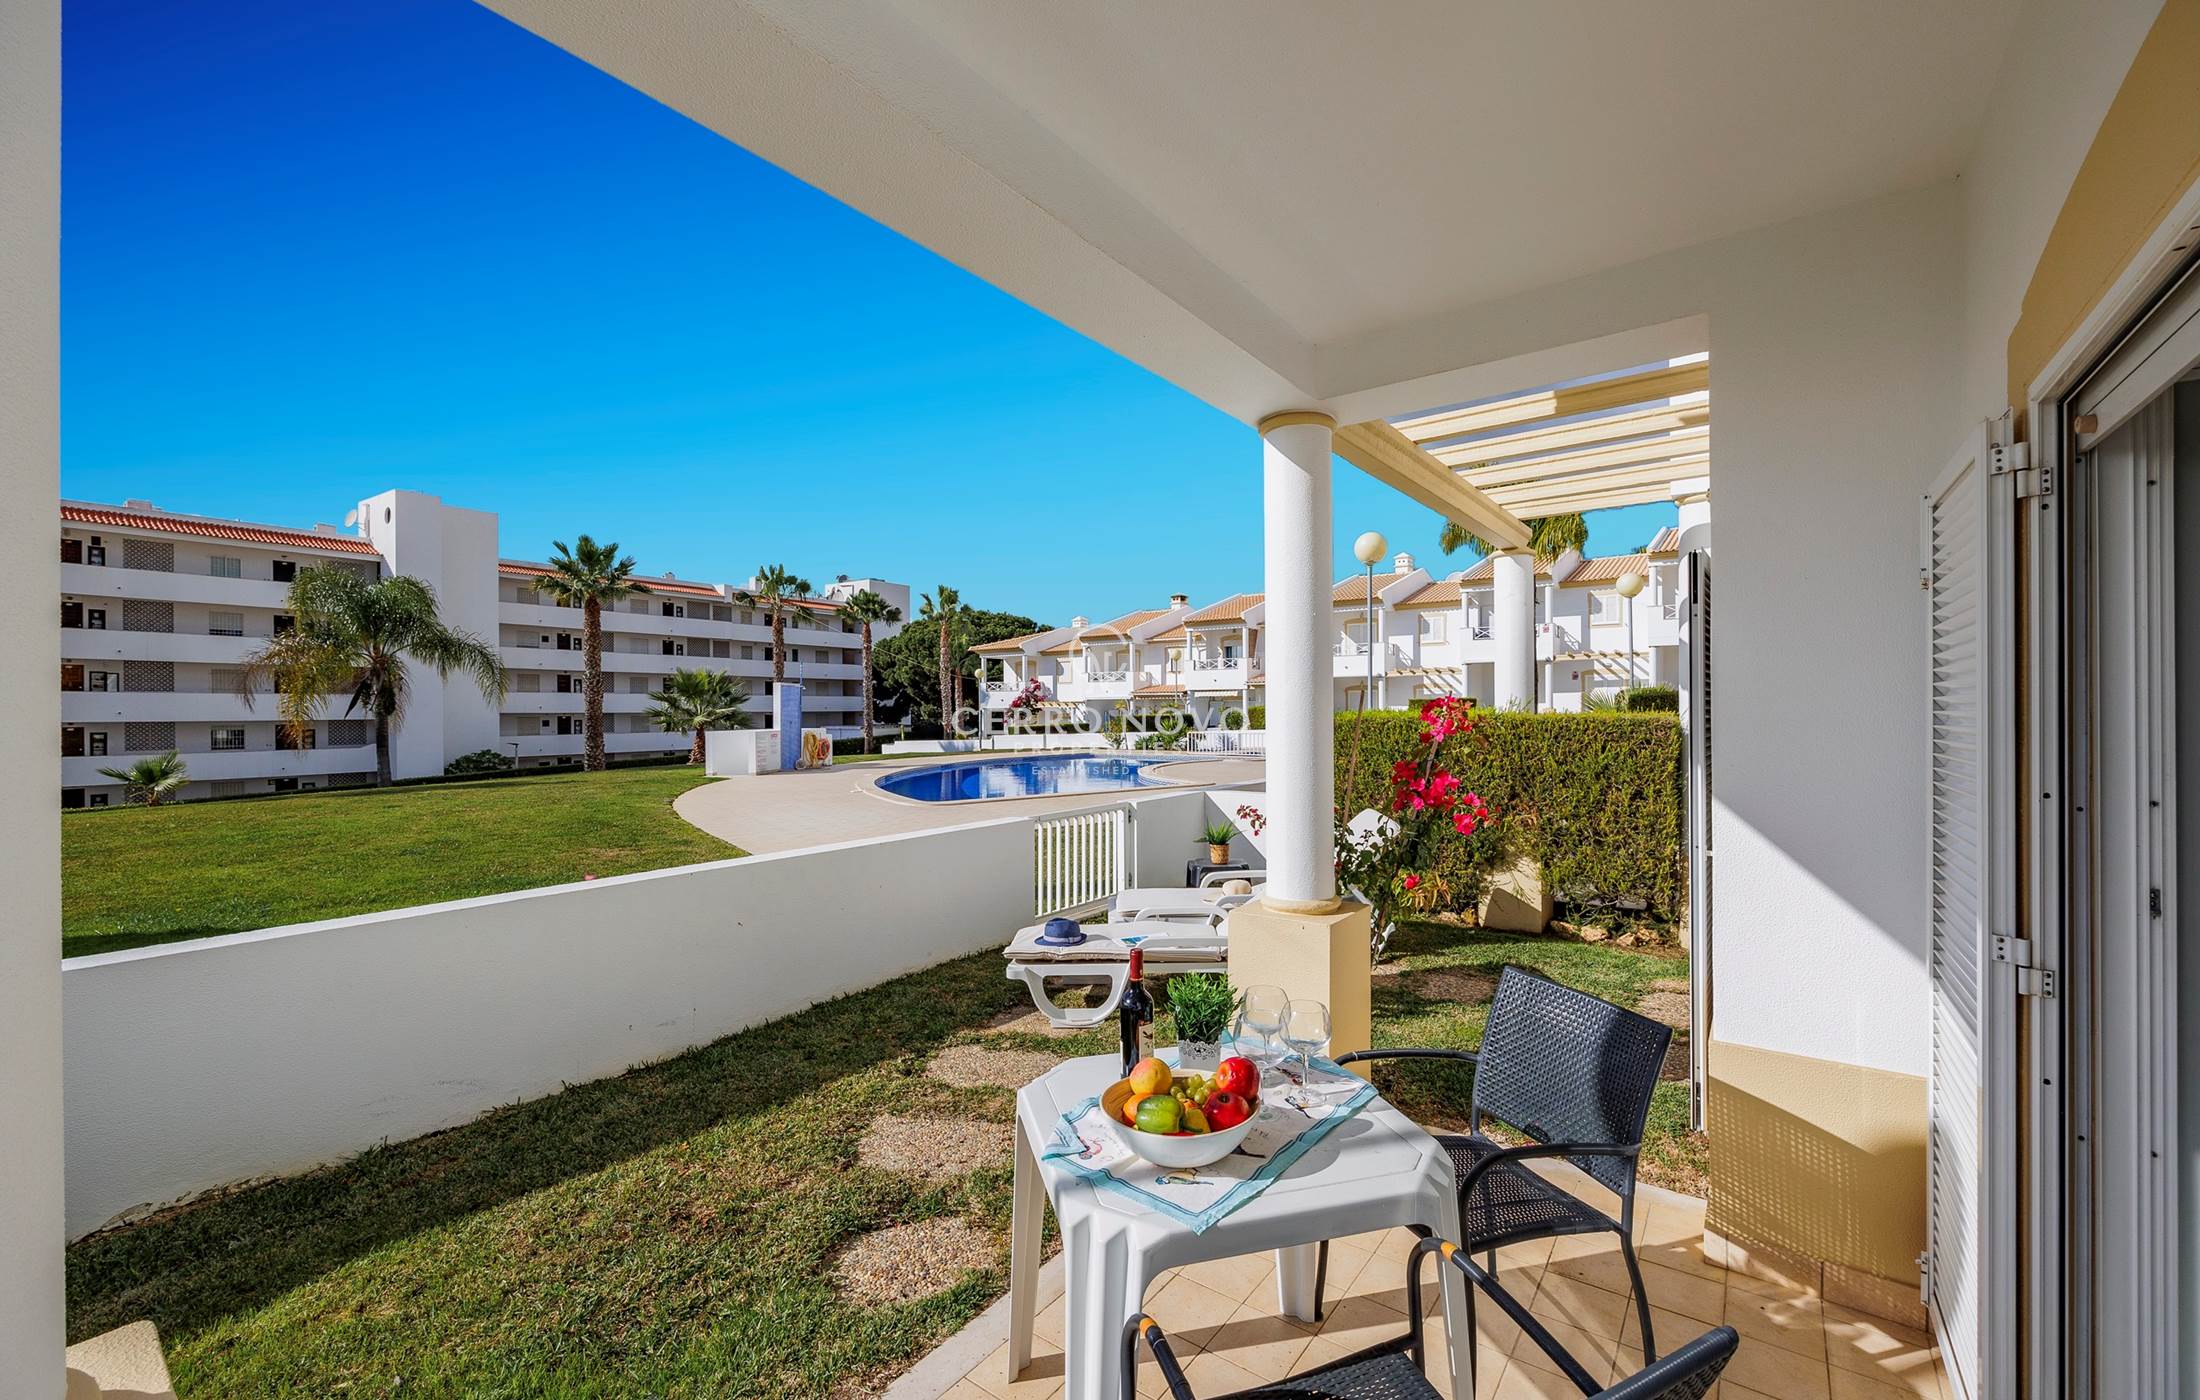 Well-located townhouse in a convenient central location close to the beach